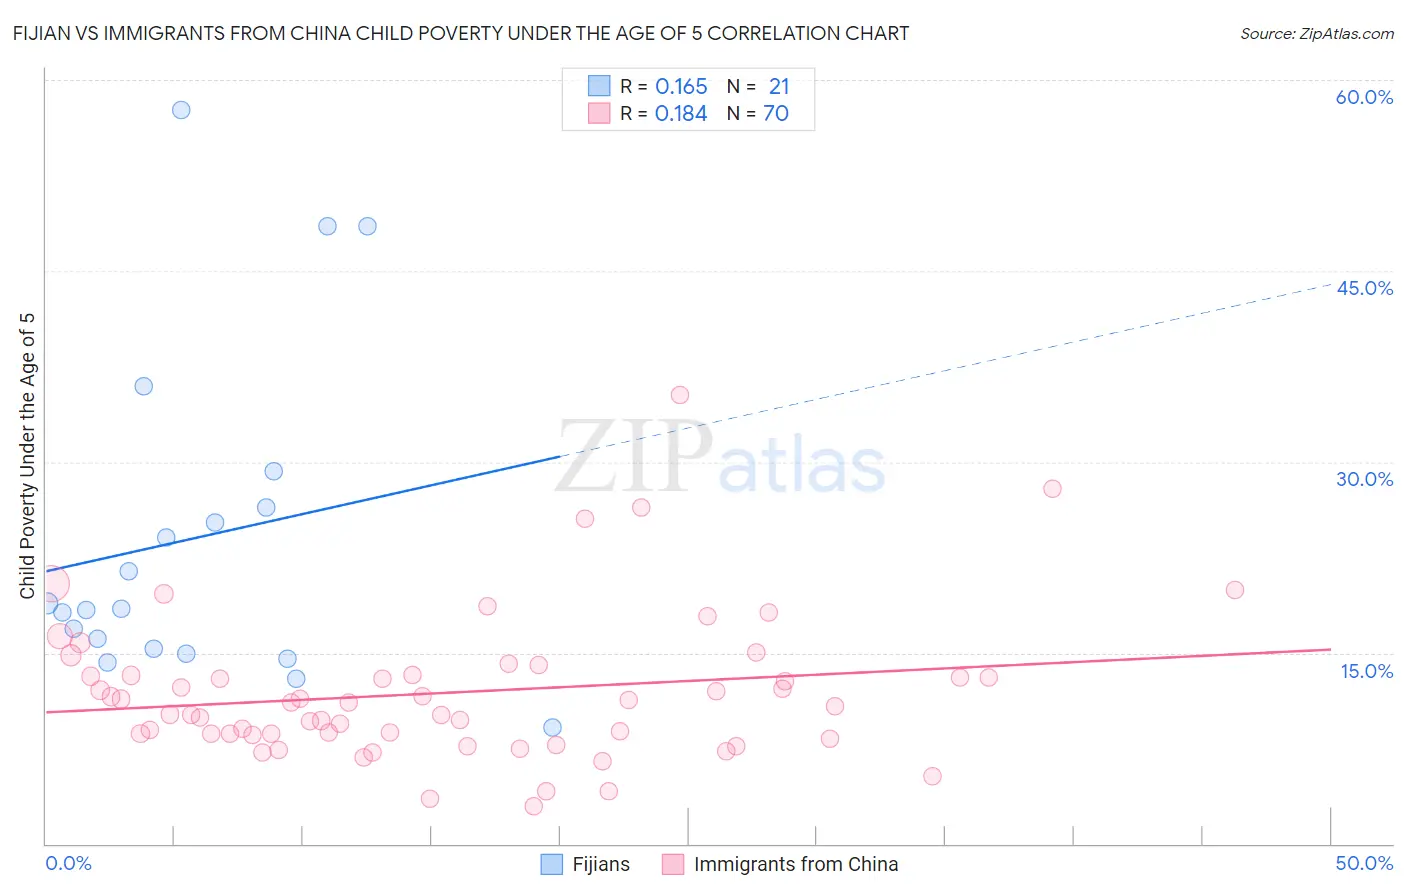 Fijian vs Immigrants from China Child Poverty Under the Age of 5